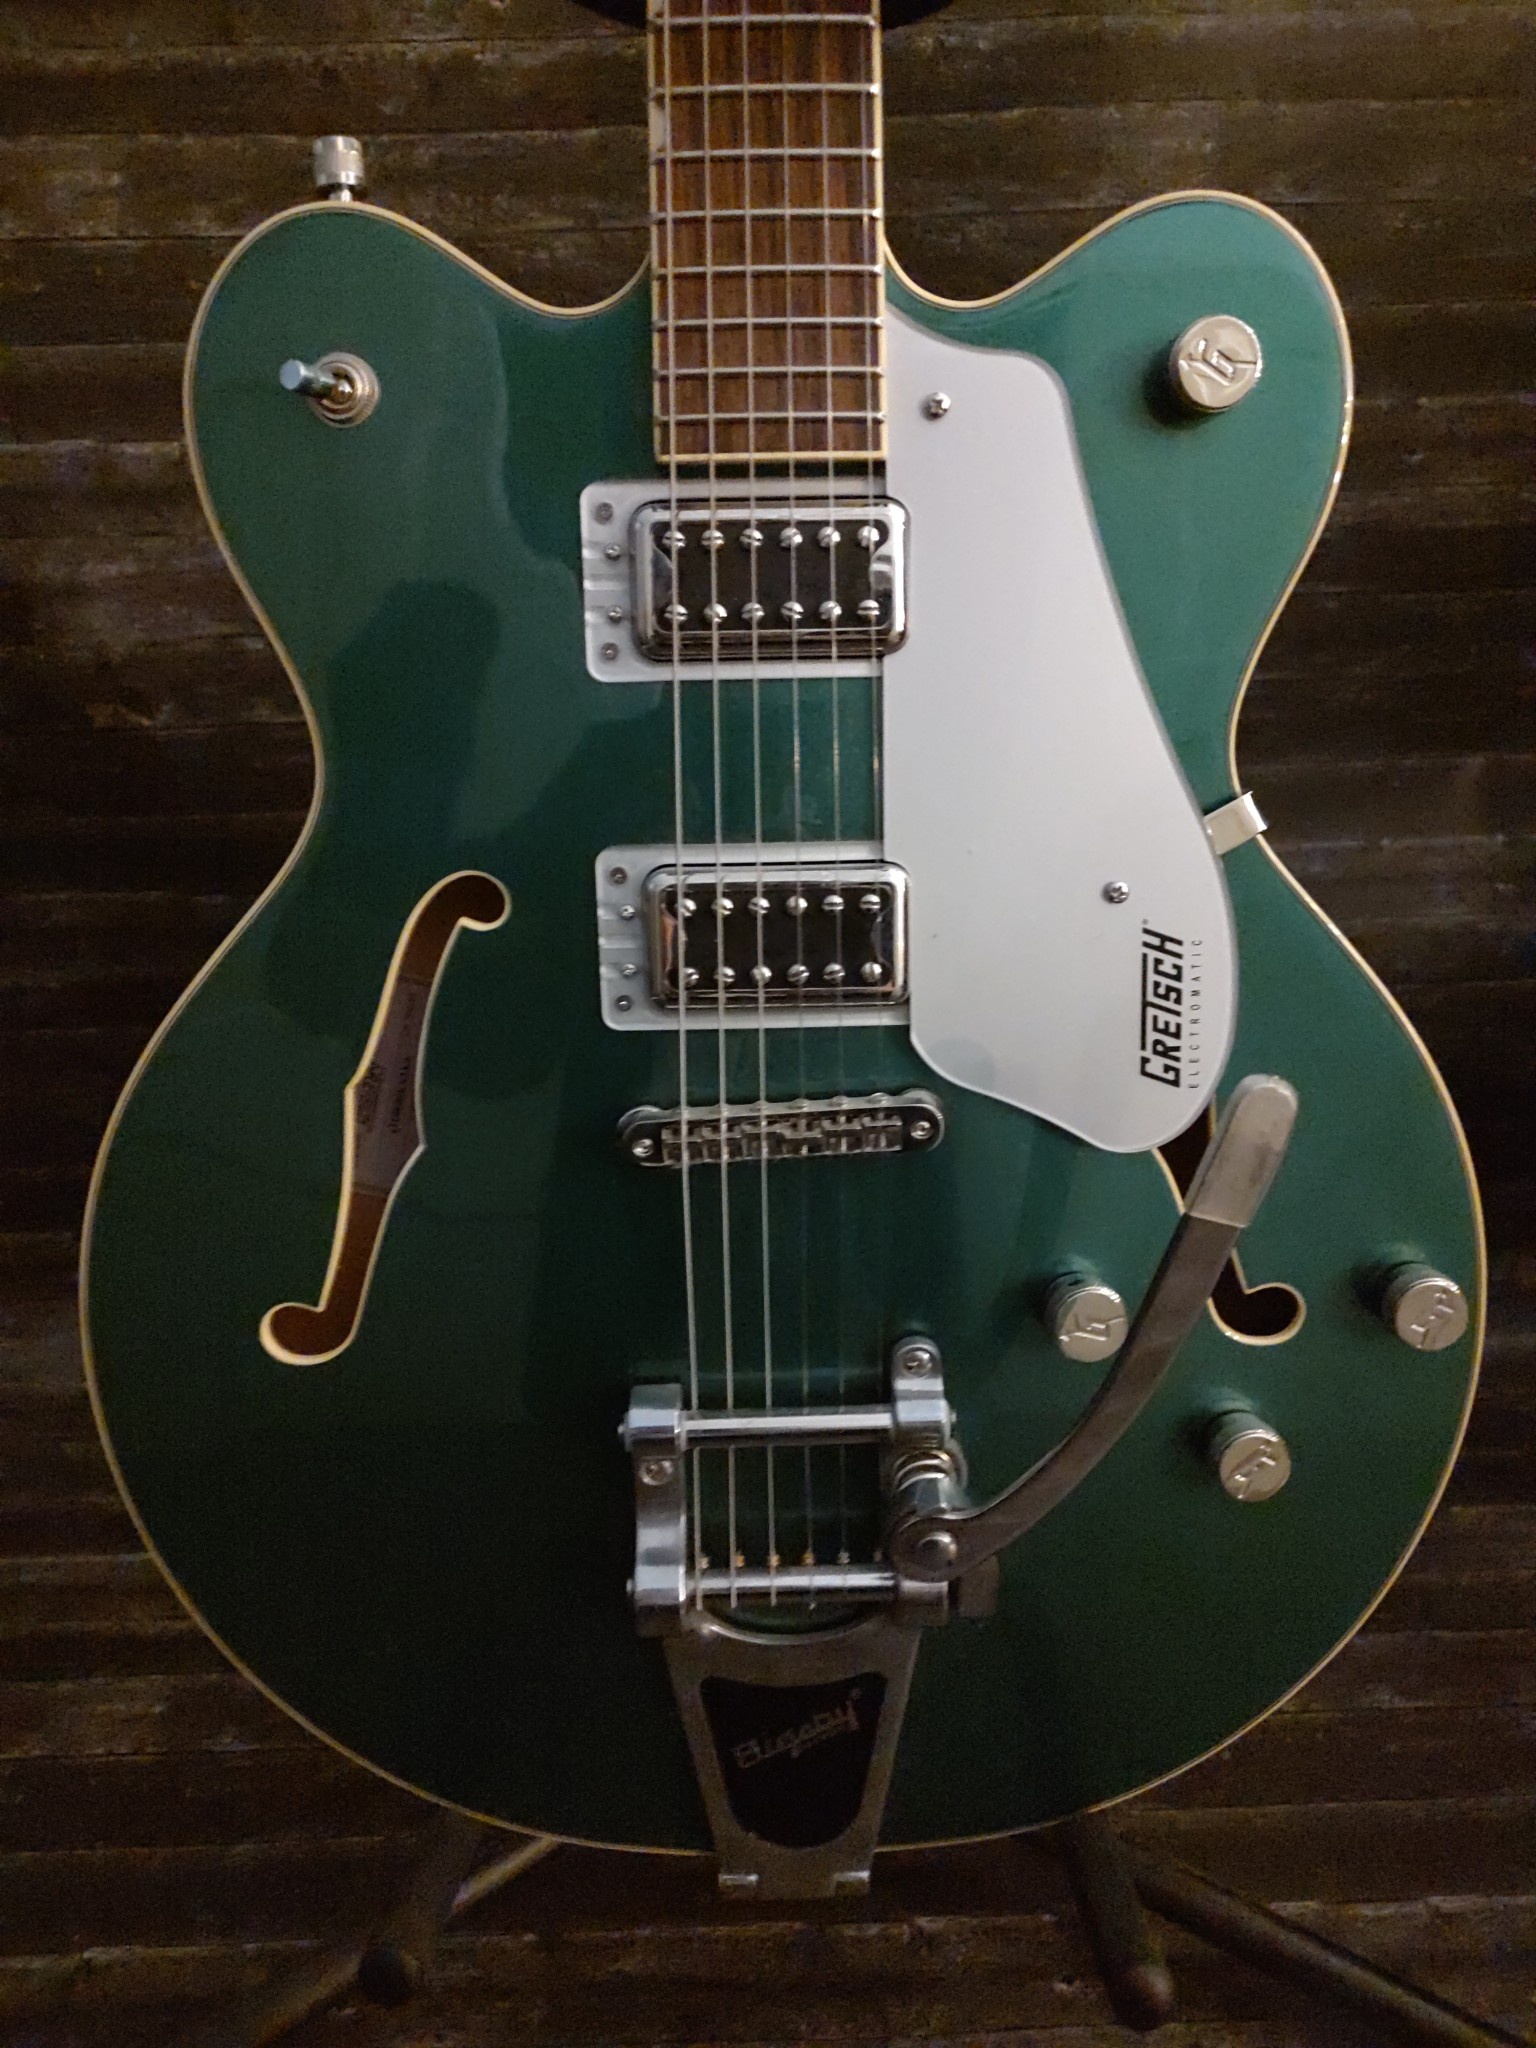 Gretsch G5622t Hollow Body with Bigsby